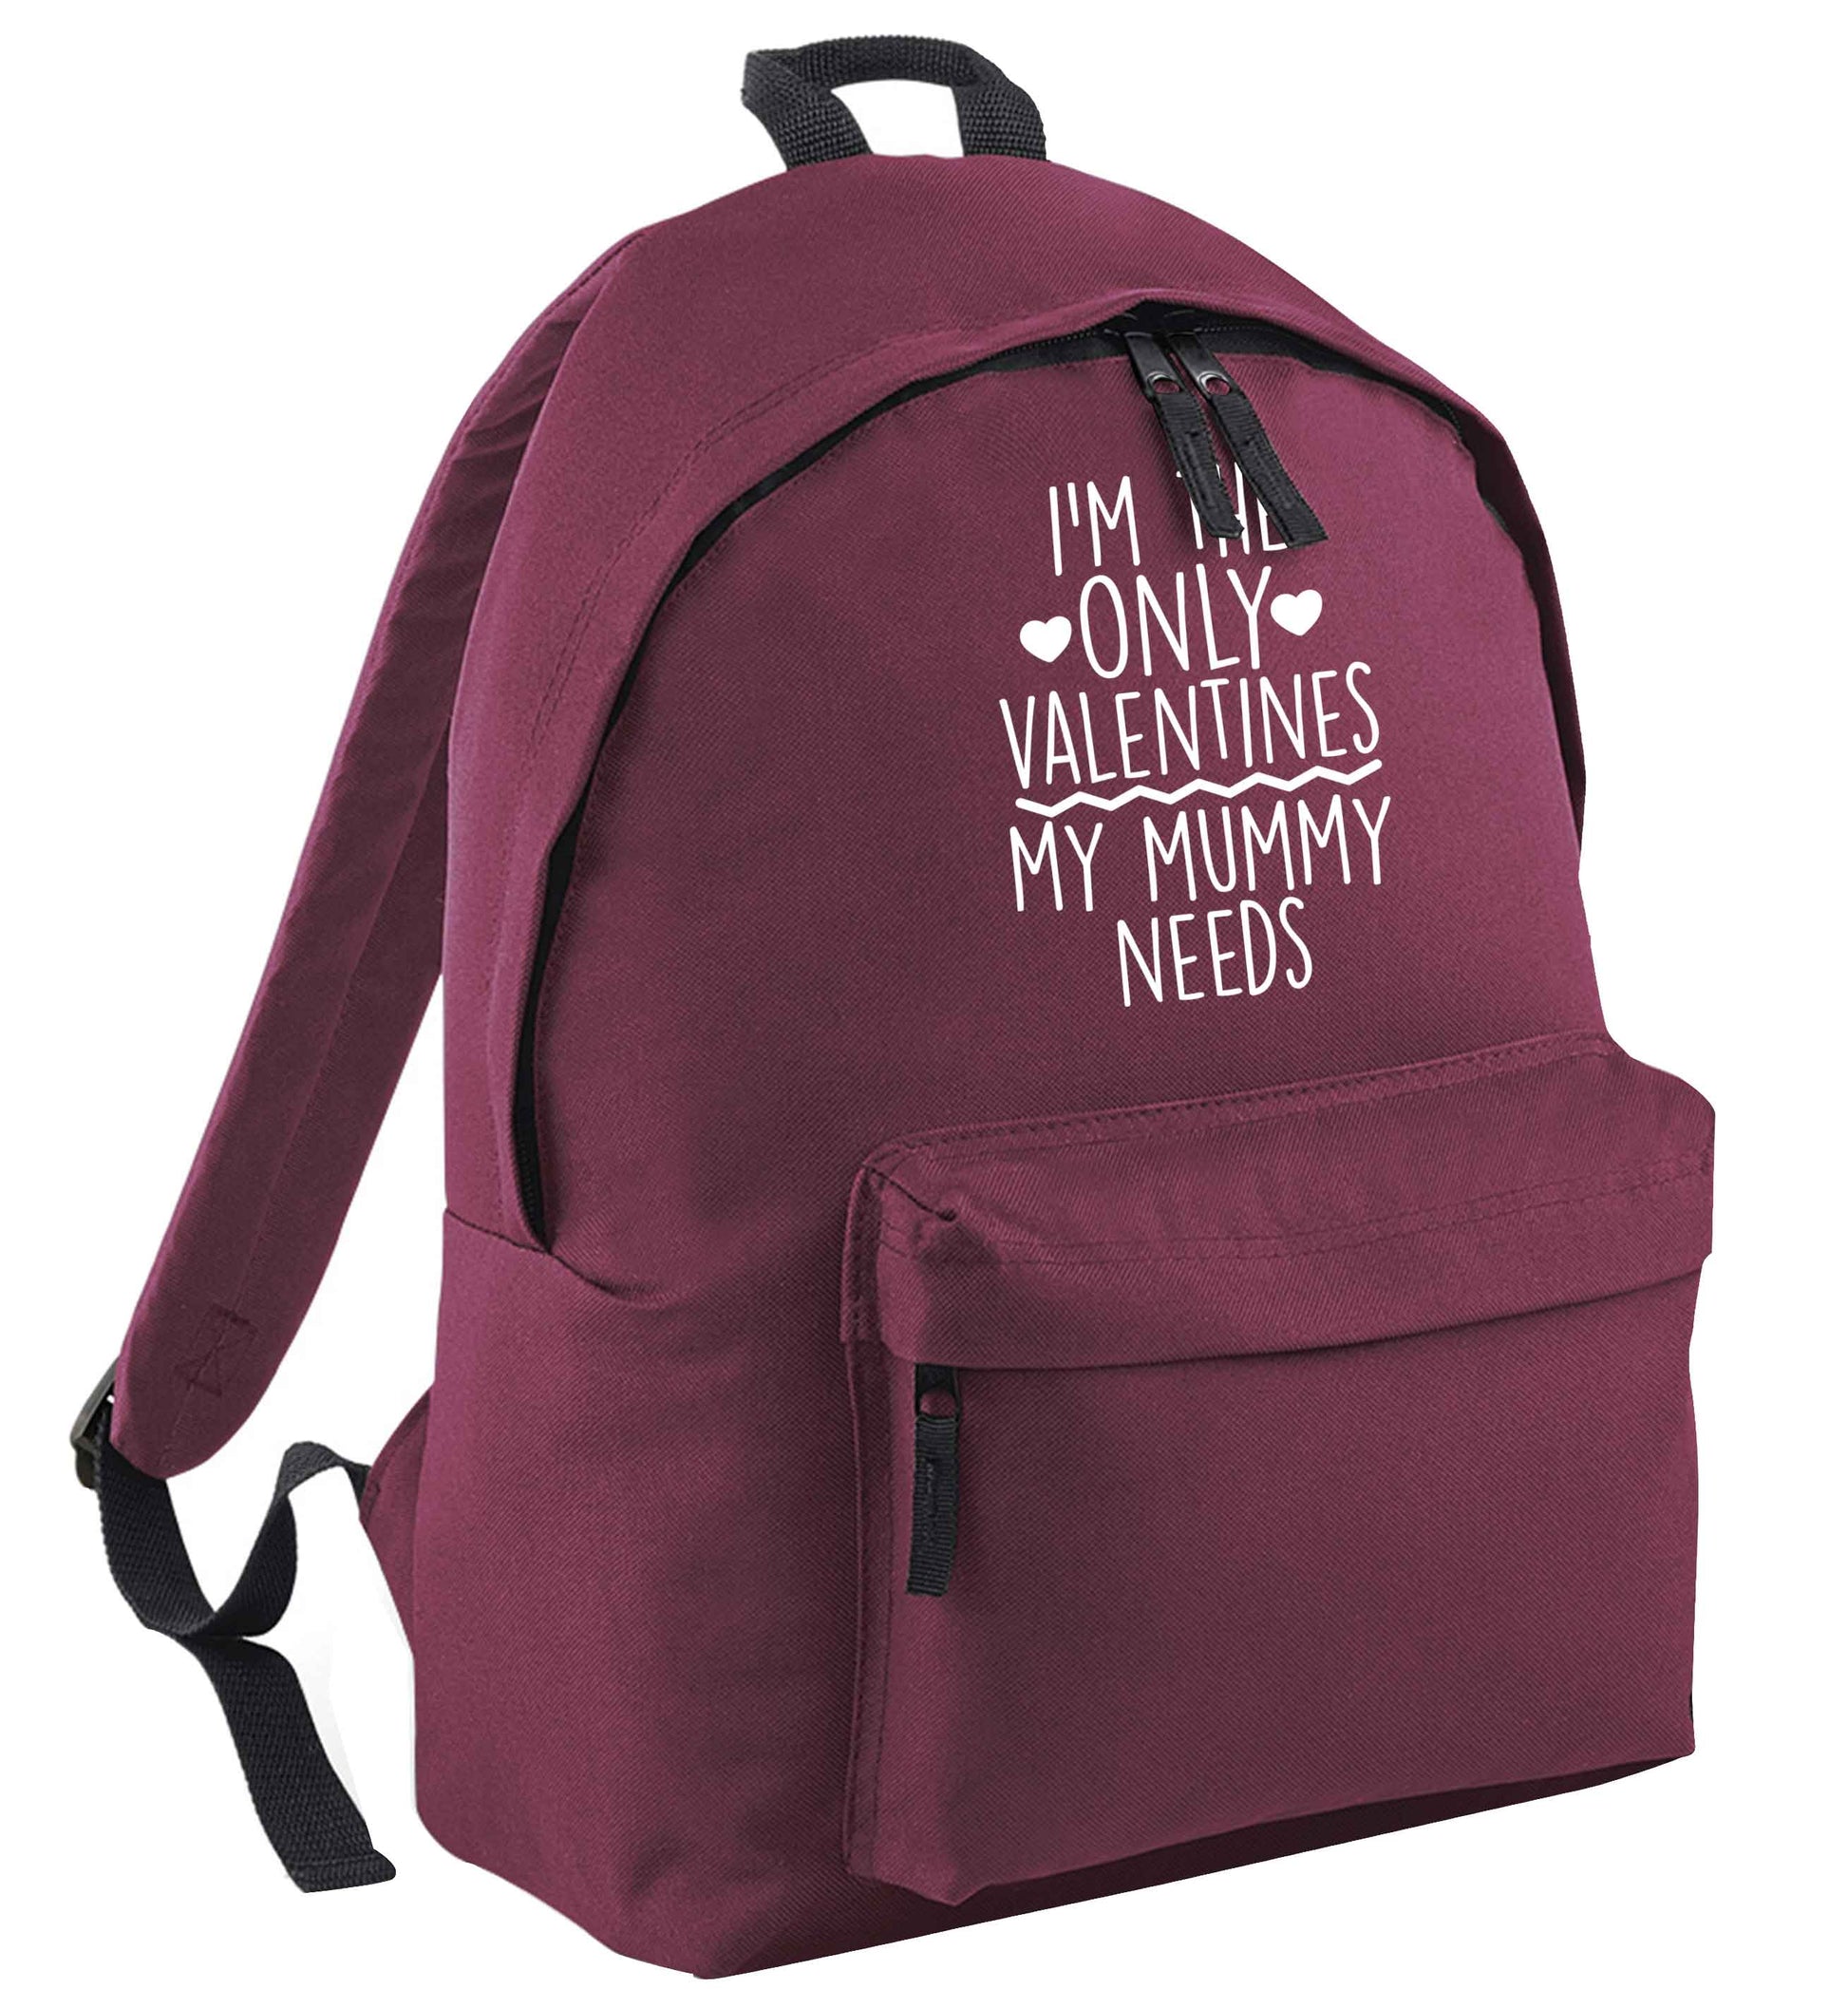 I'm the only valentines my mummy needs black adults backpack